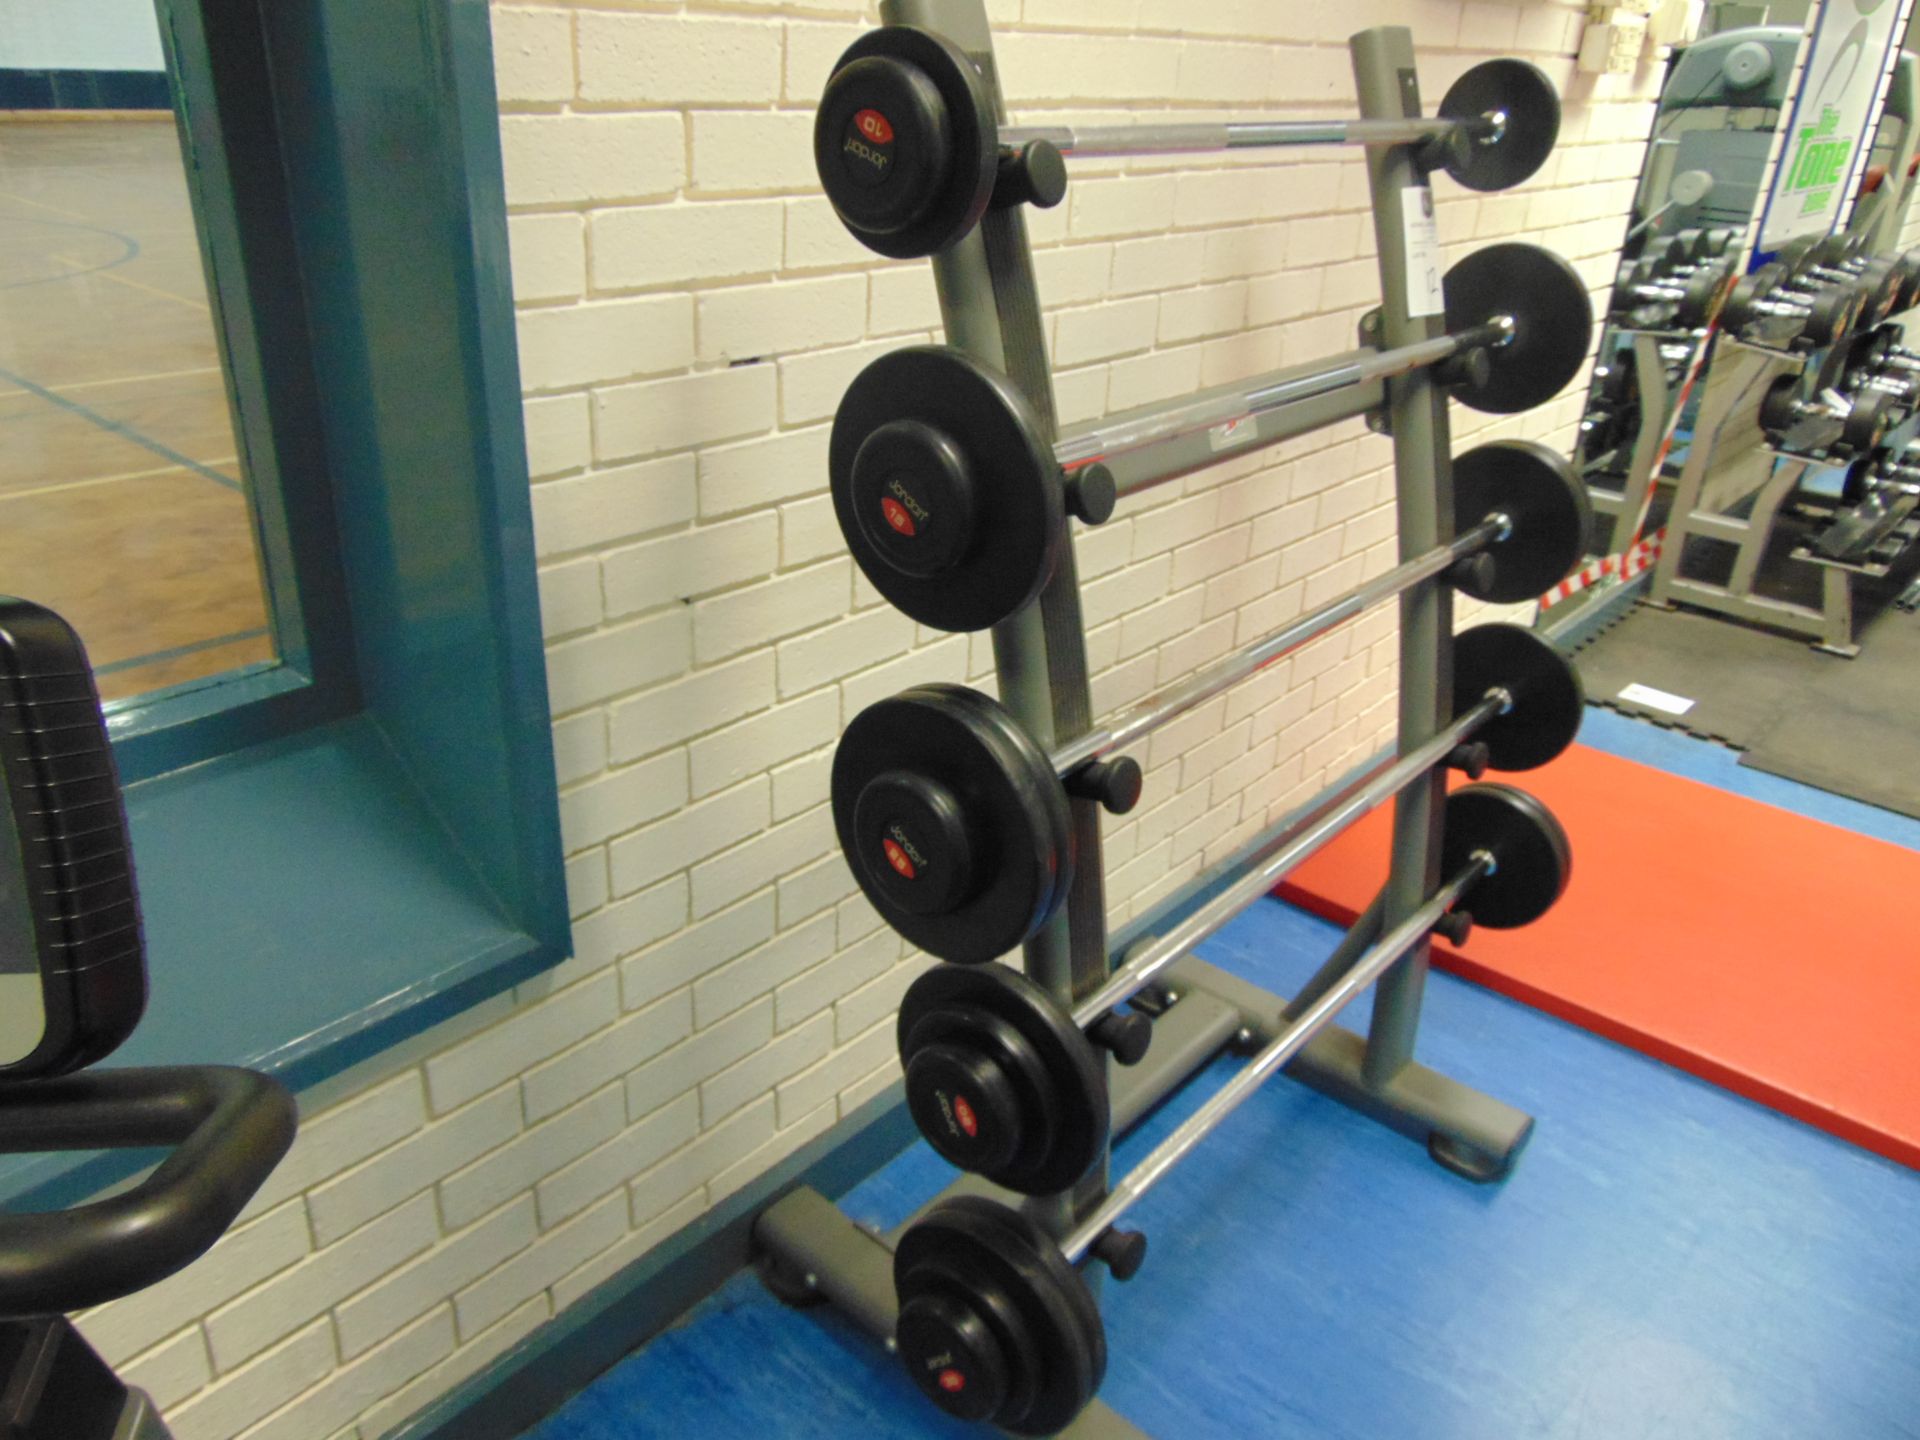 Jordan Weight Lifting Bar Station Weights From 20kg to 60kg x5 Bars - Image 2 of 3